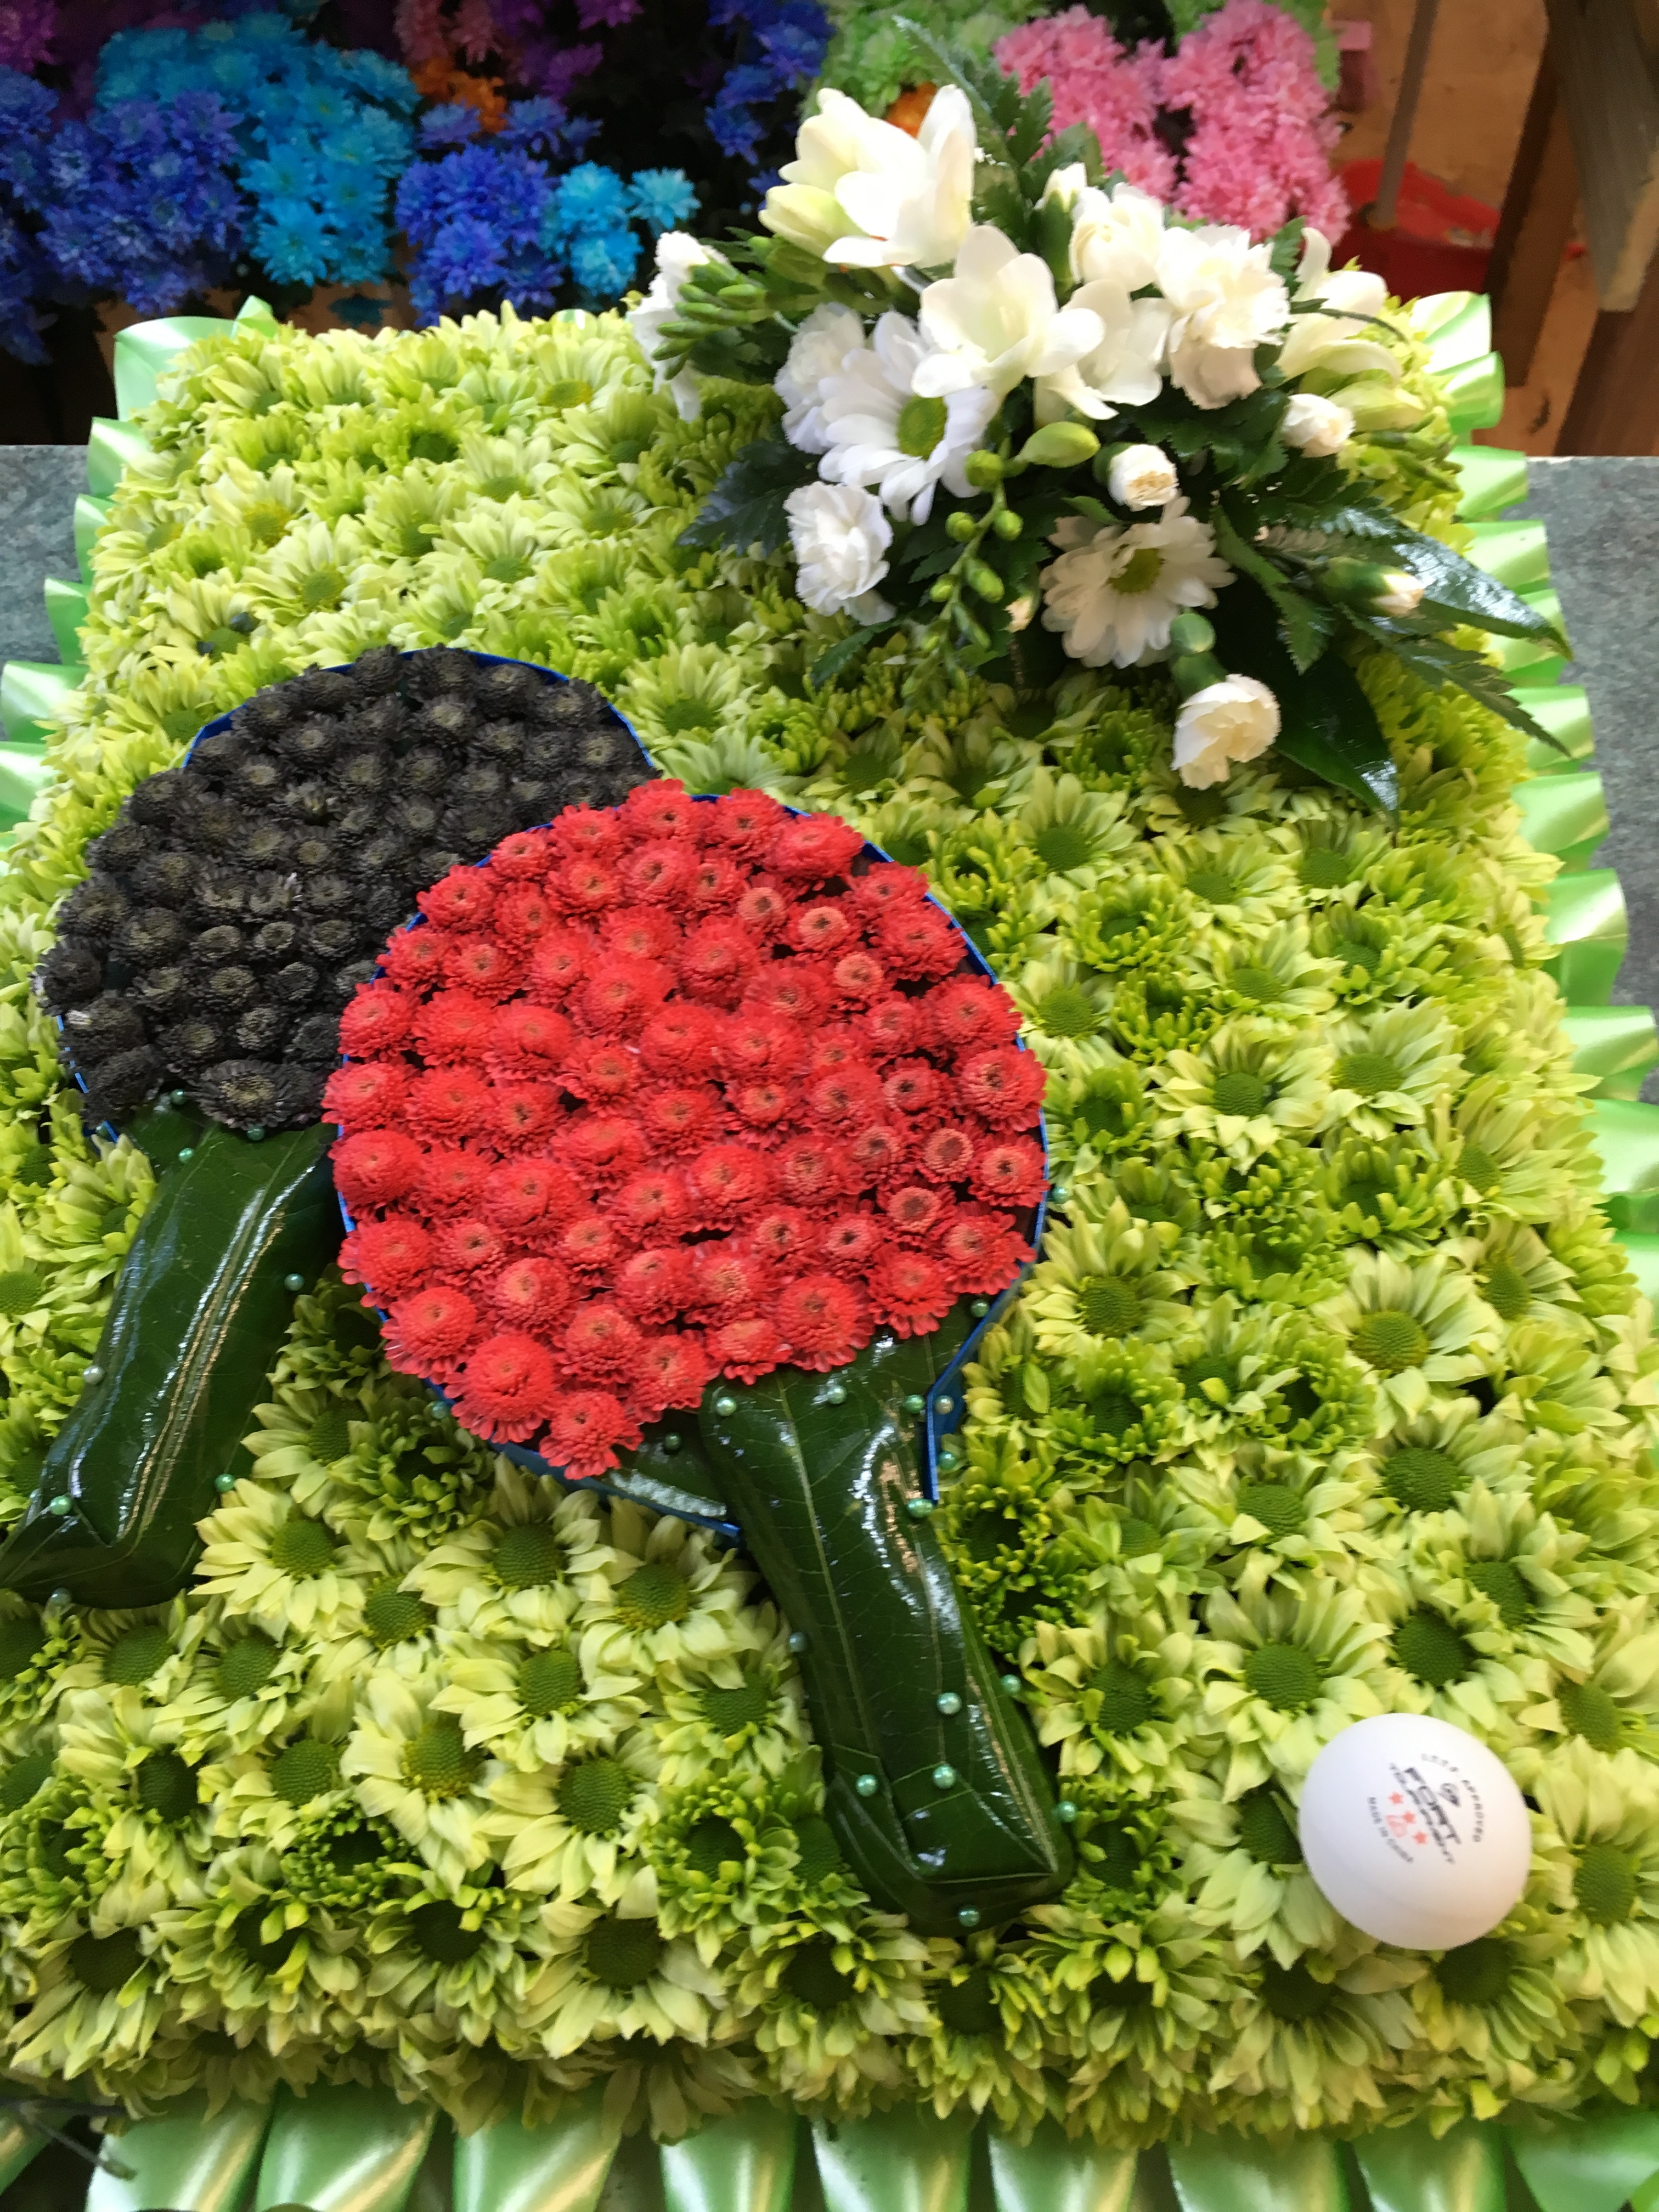 table tennis bats made from flowers